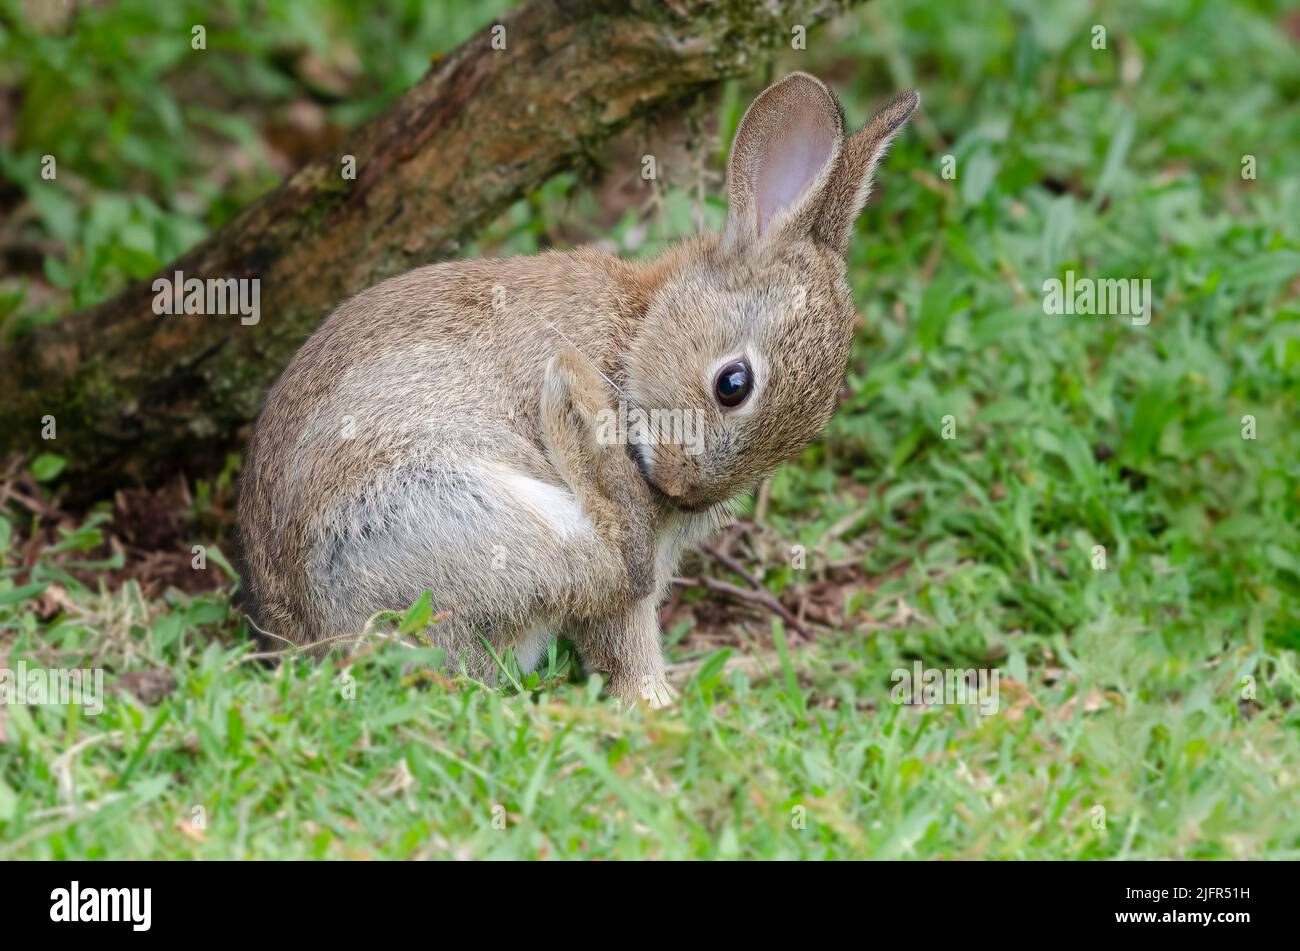 A young wild rabbit is sitting on the grass. It has its rear leg lifted as it looks down to inspect the paw Stock Photo